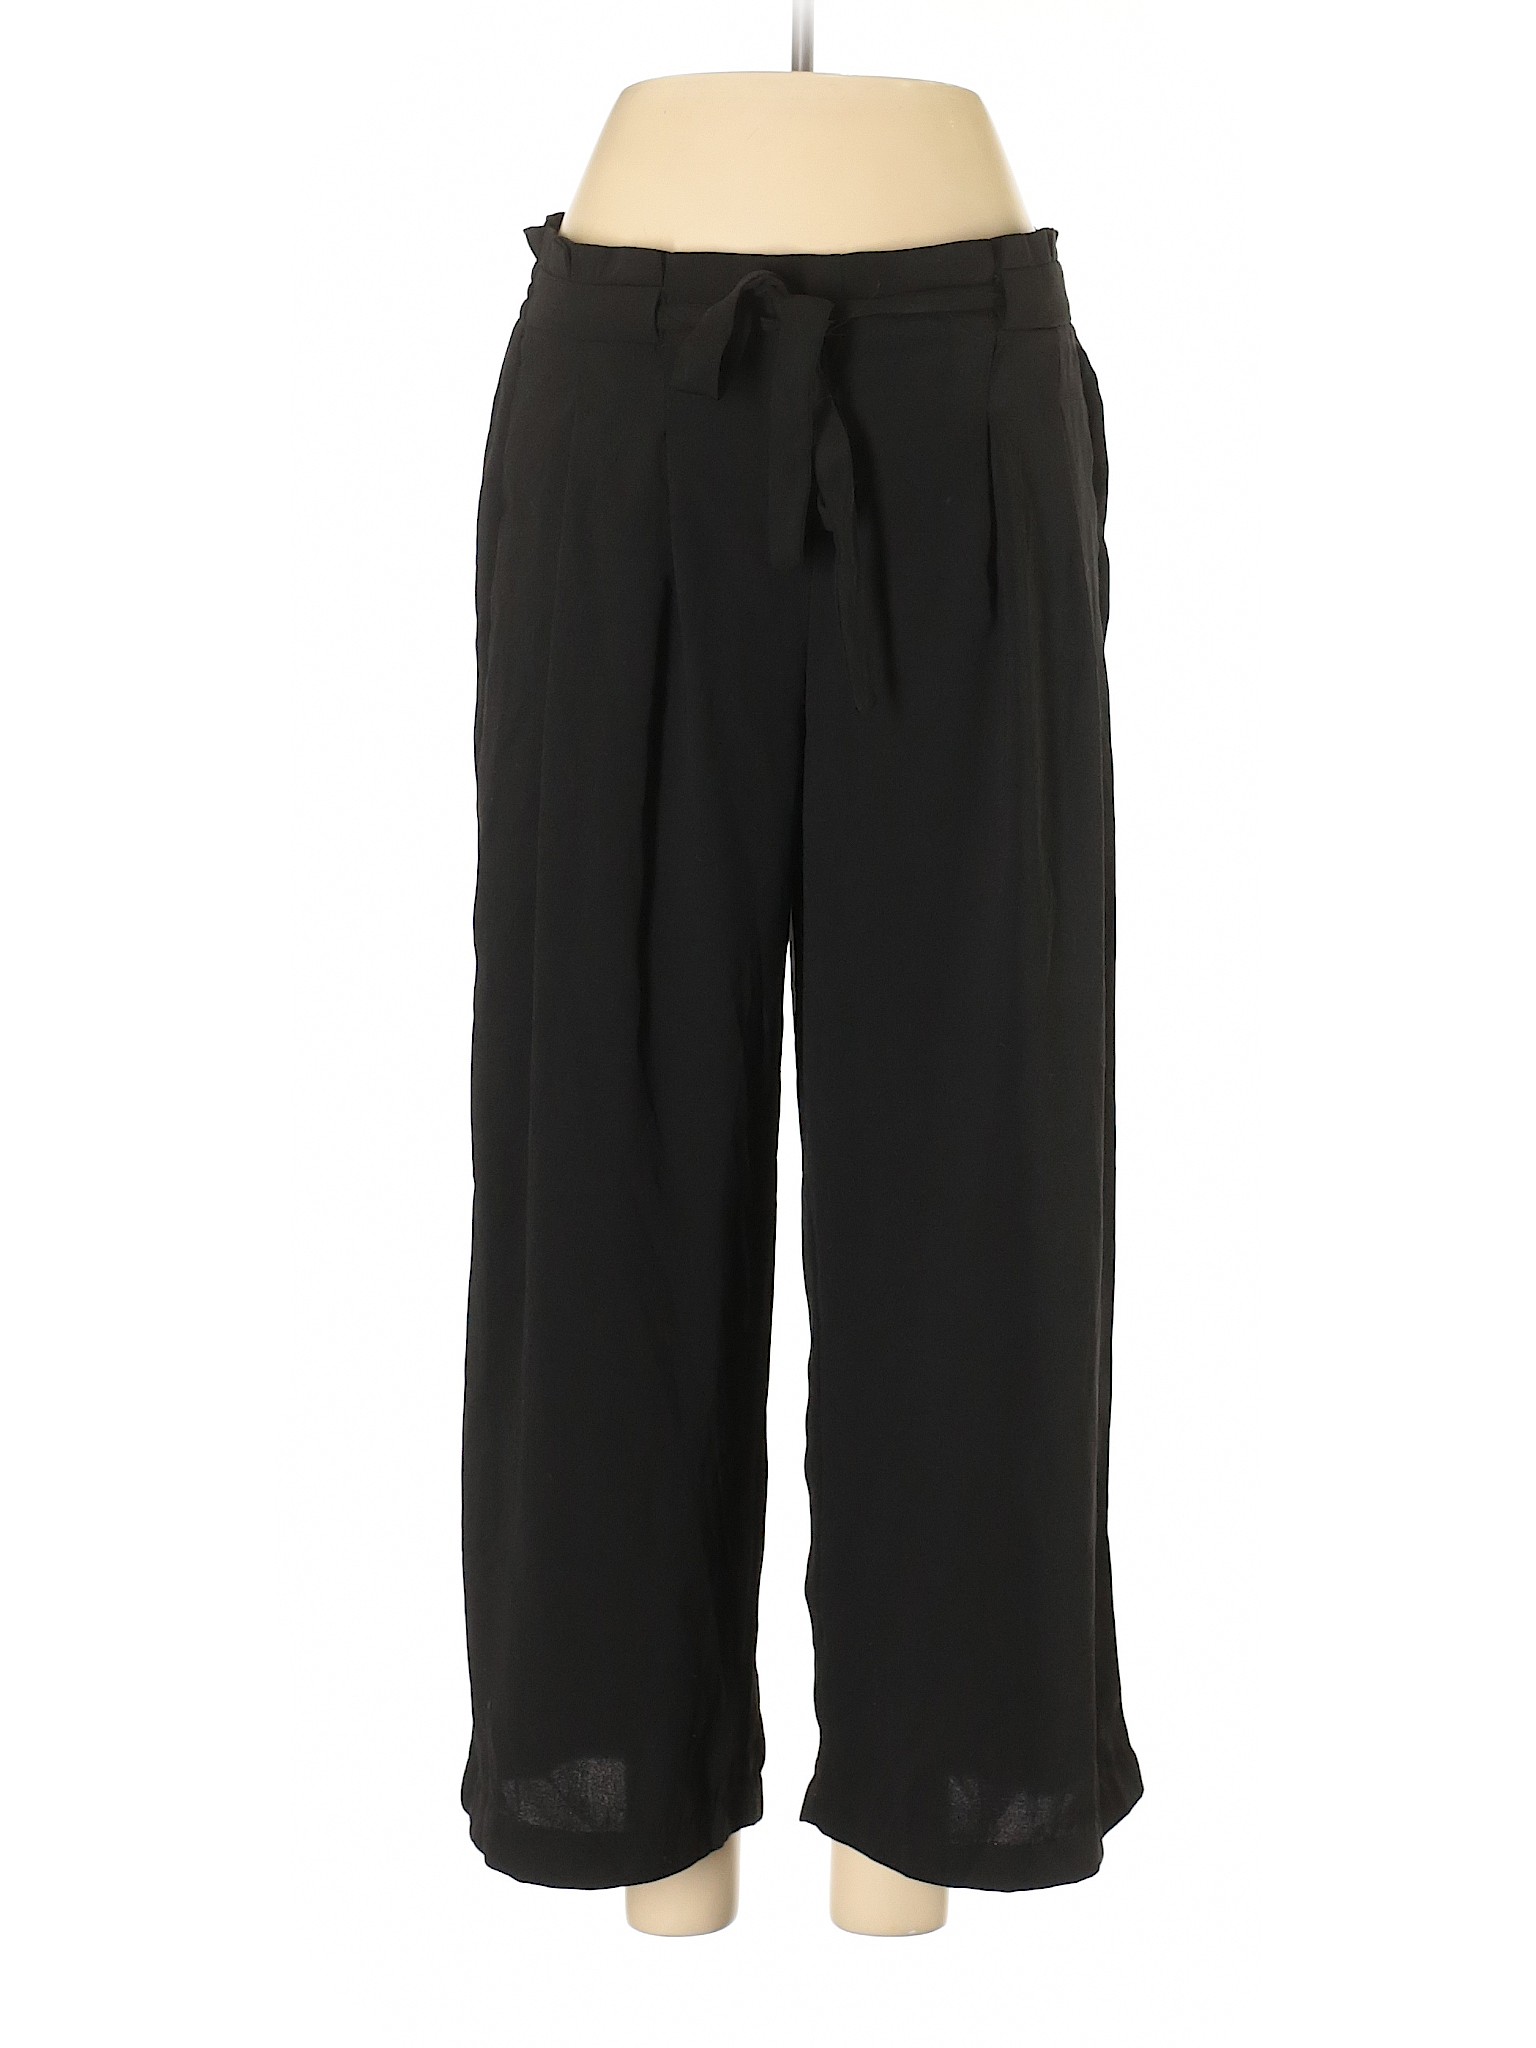 Adrienne Vittadini 100% Polyester Solid Black Casual Pants Size M - 70% ...